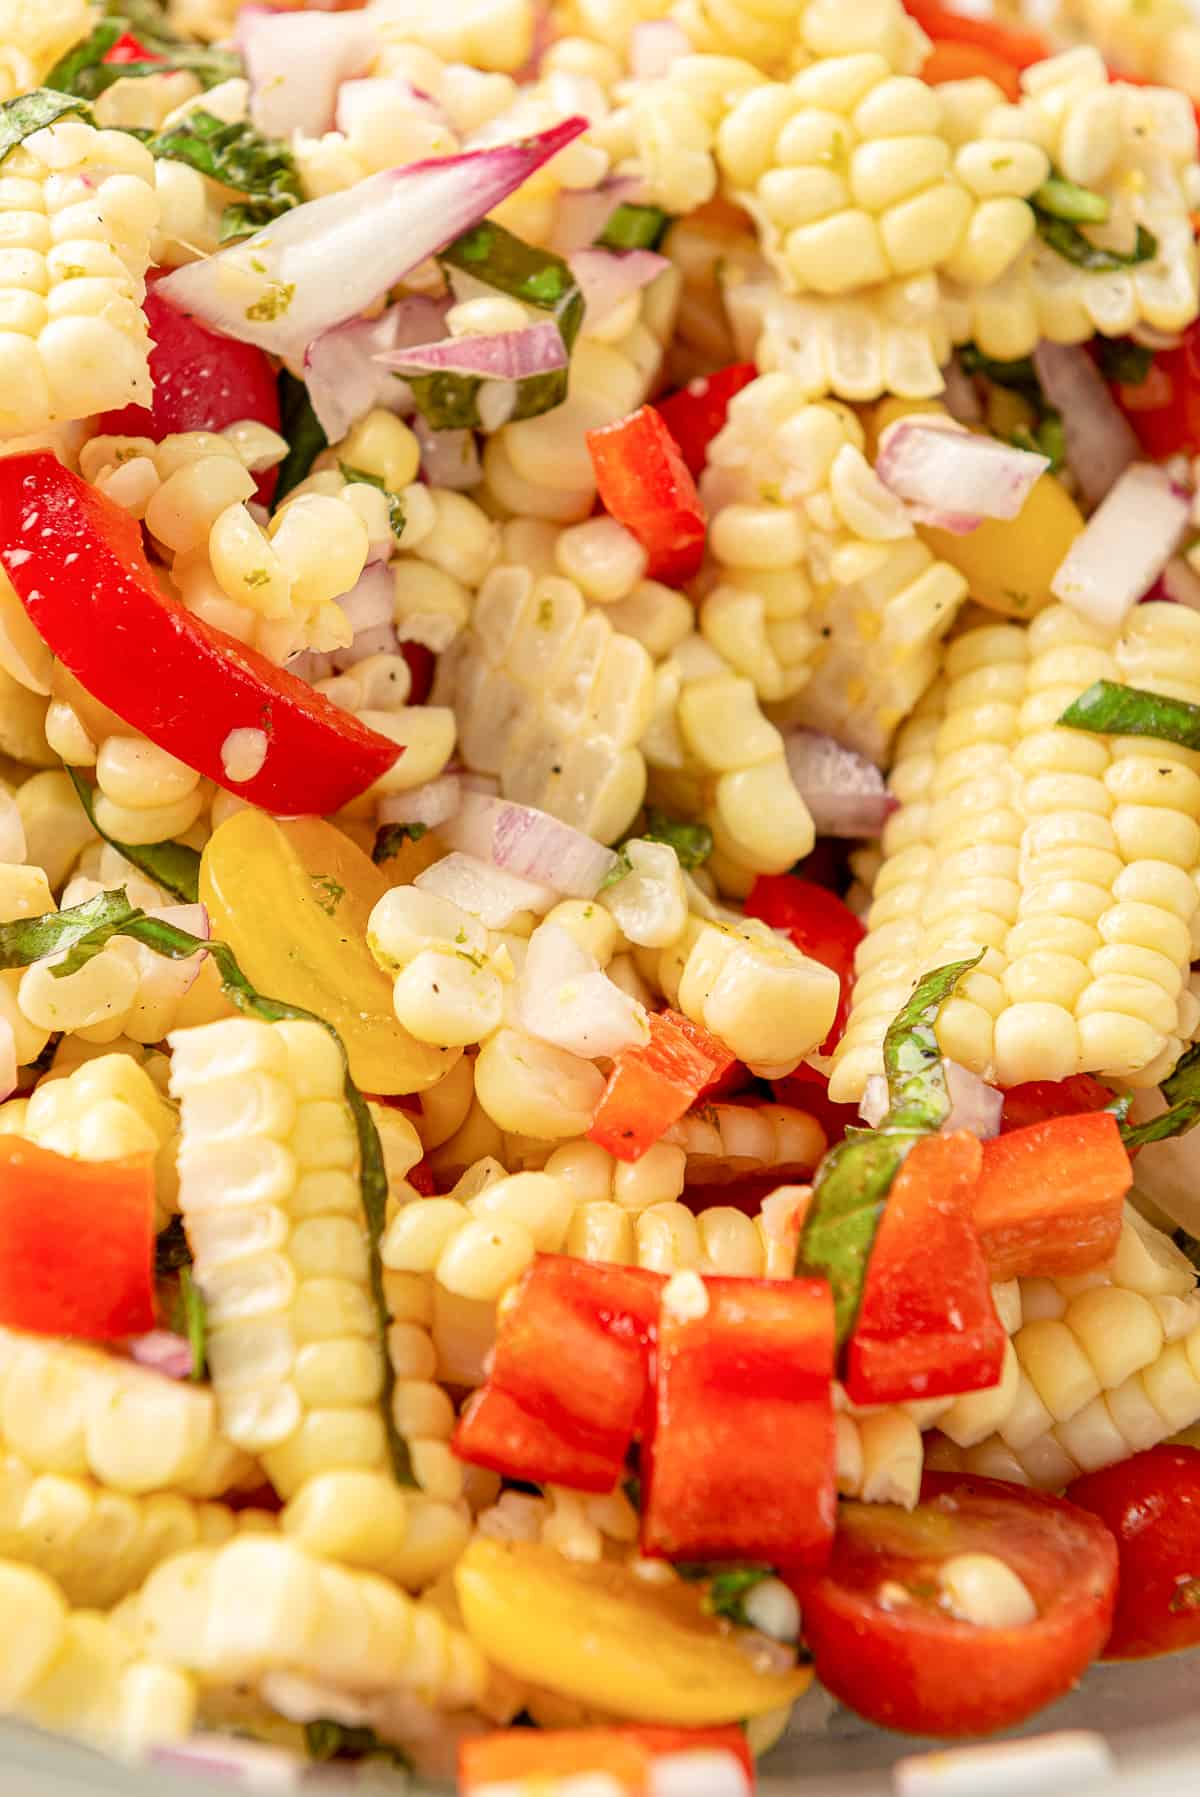  A close up of the corn salad recipe ingredients.